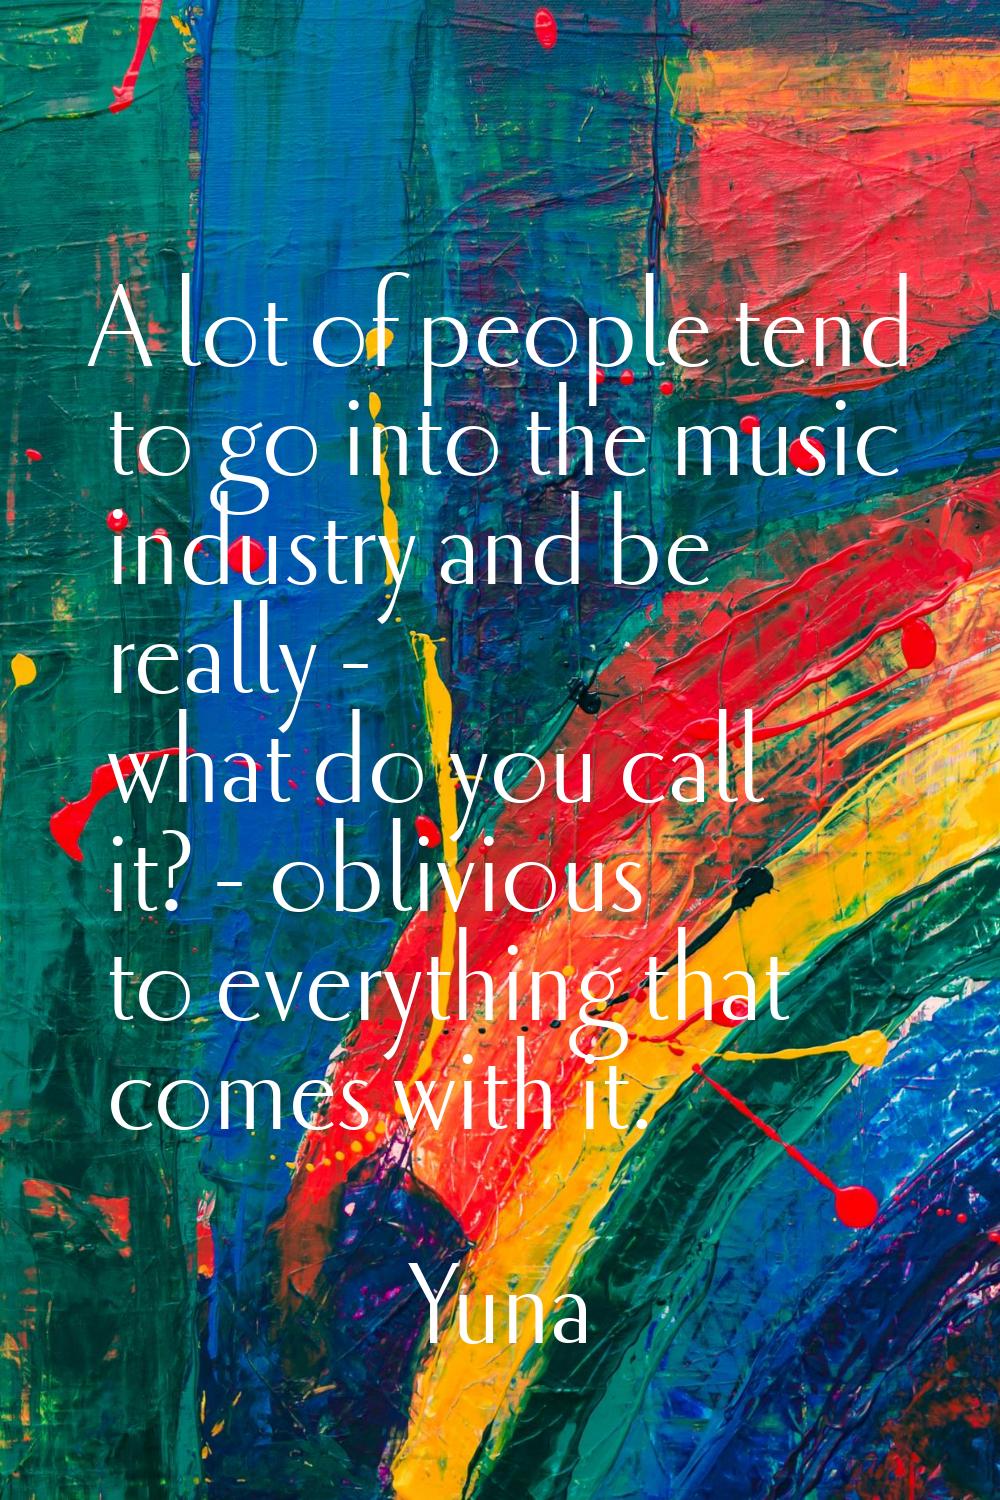 A lot of people tend to go into the music industry and be really - what do you call it? - oblivious